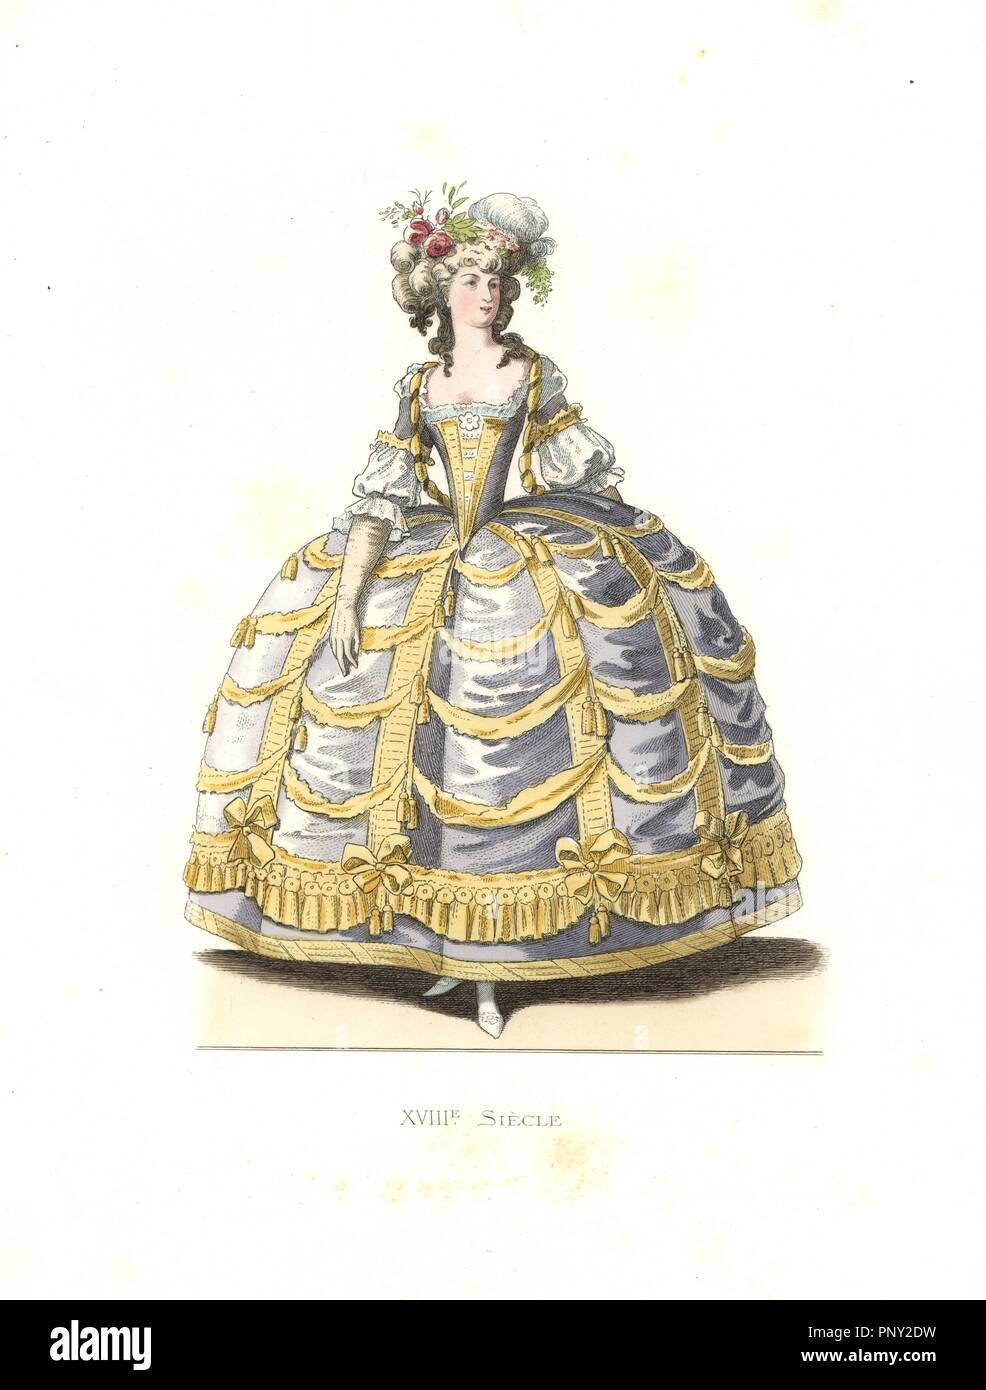 Woman in ball gown, France, 18th century. Handcolored illustration by E. Lechevallier-Chevignard, lithographed by A. Didier, L. Flameng, F. Laguillermie, from Georges Duplessis's 'Costumes historiques des XVIe, XVIIe et XVIIIe siecles' (Historical costumes of the 16th, 17th and 18th centuries), Paris 1867. The book was a continuation of the series on the costumes of the 12th to 15th centuries published by Camille Bonnard and Paul Mercuri from 1830. Georges Duplessis (1834-1899) was curator of the Prints department at the Bibliotheque nationale. Edmond Lechevallier-Chevignard (1825-1902) was an Stock Photo